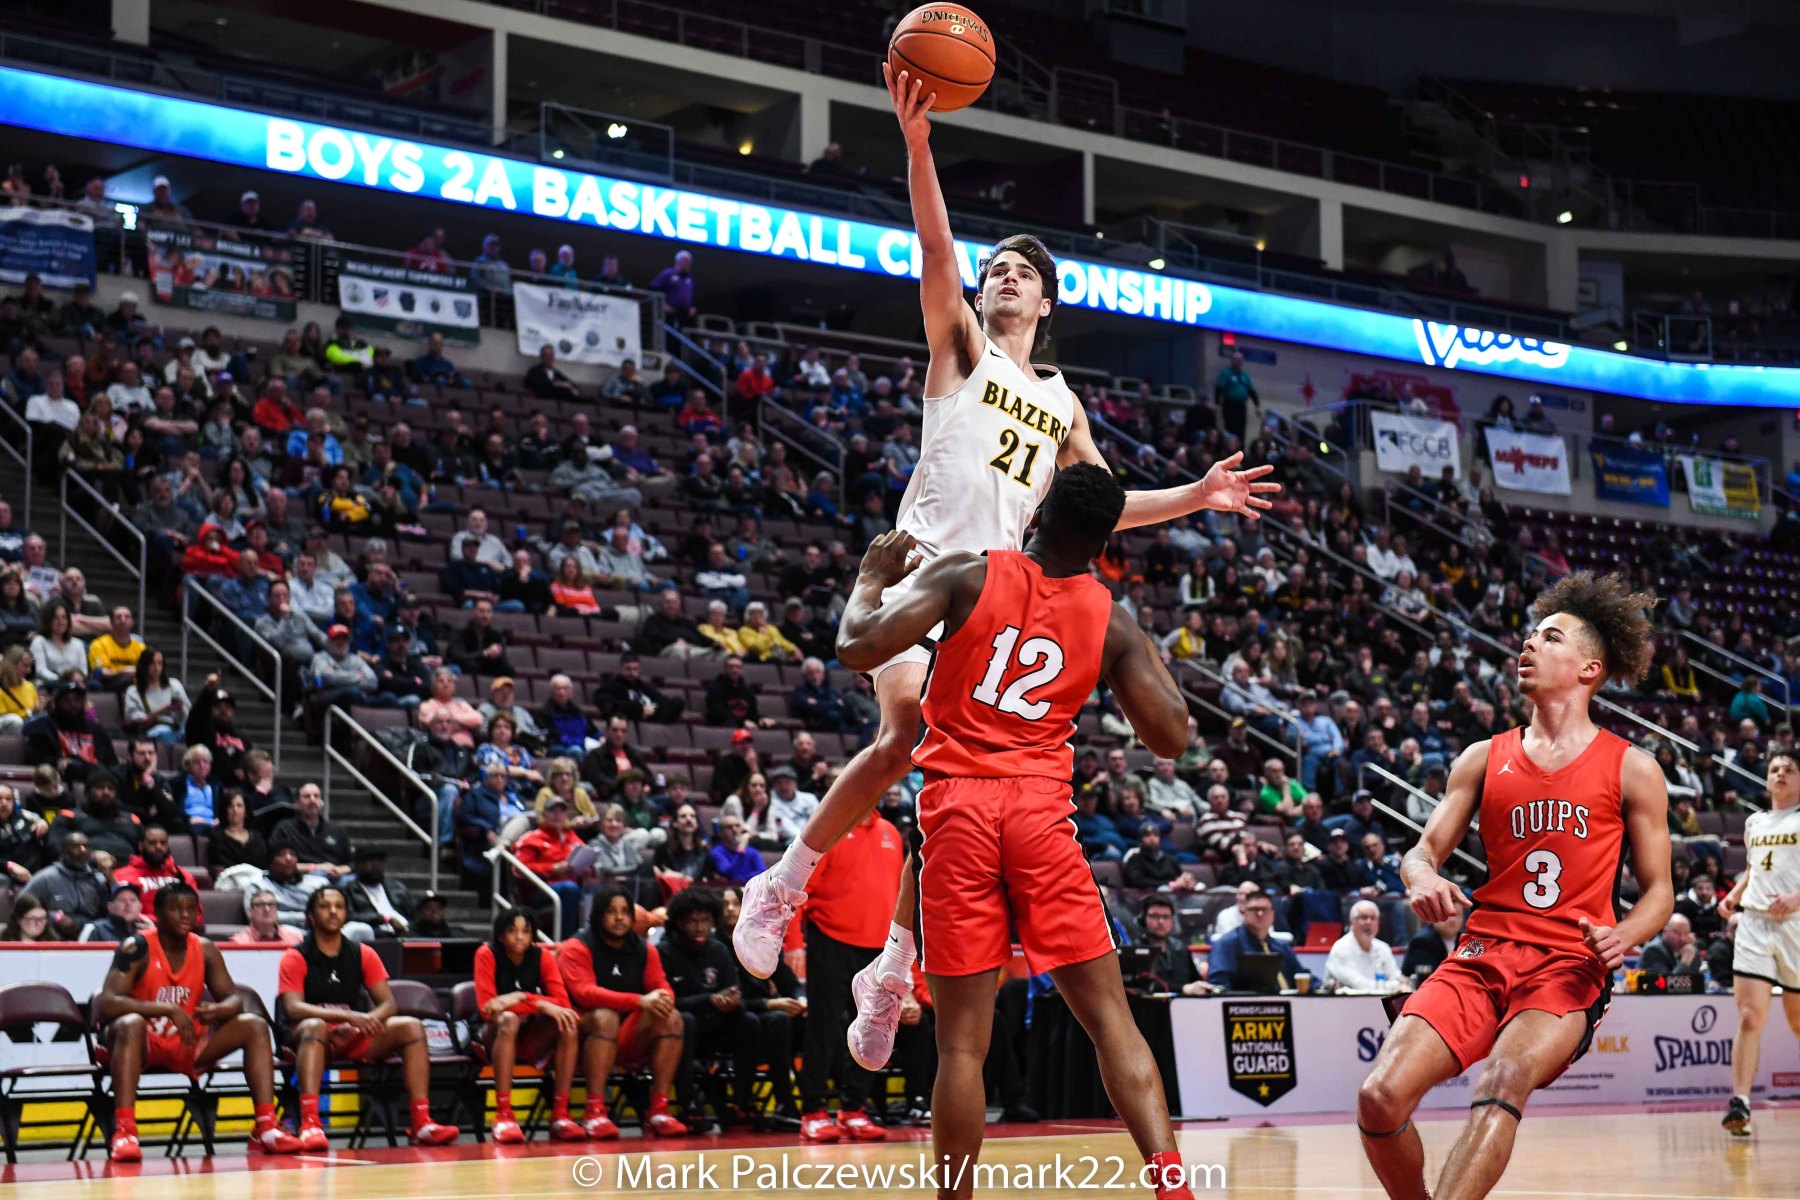 2022-23 PIAA Writers ALL-STATE boys teams: All classes